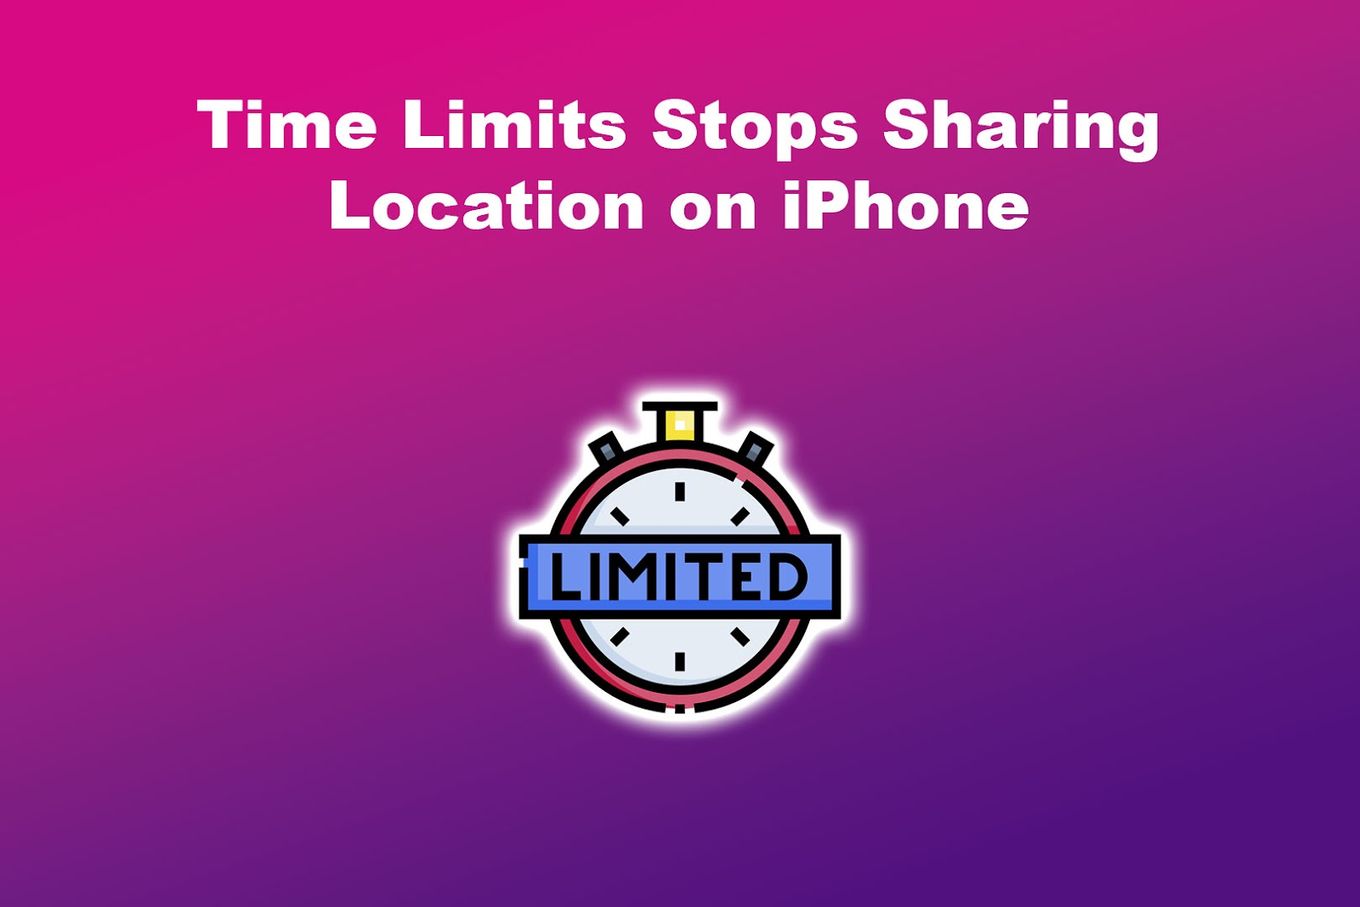 Time Limits Stops Sharing Location on iPhone